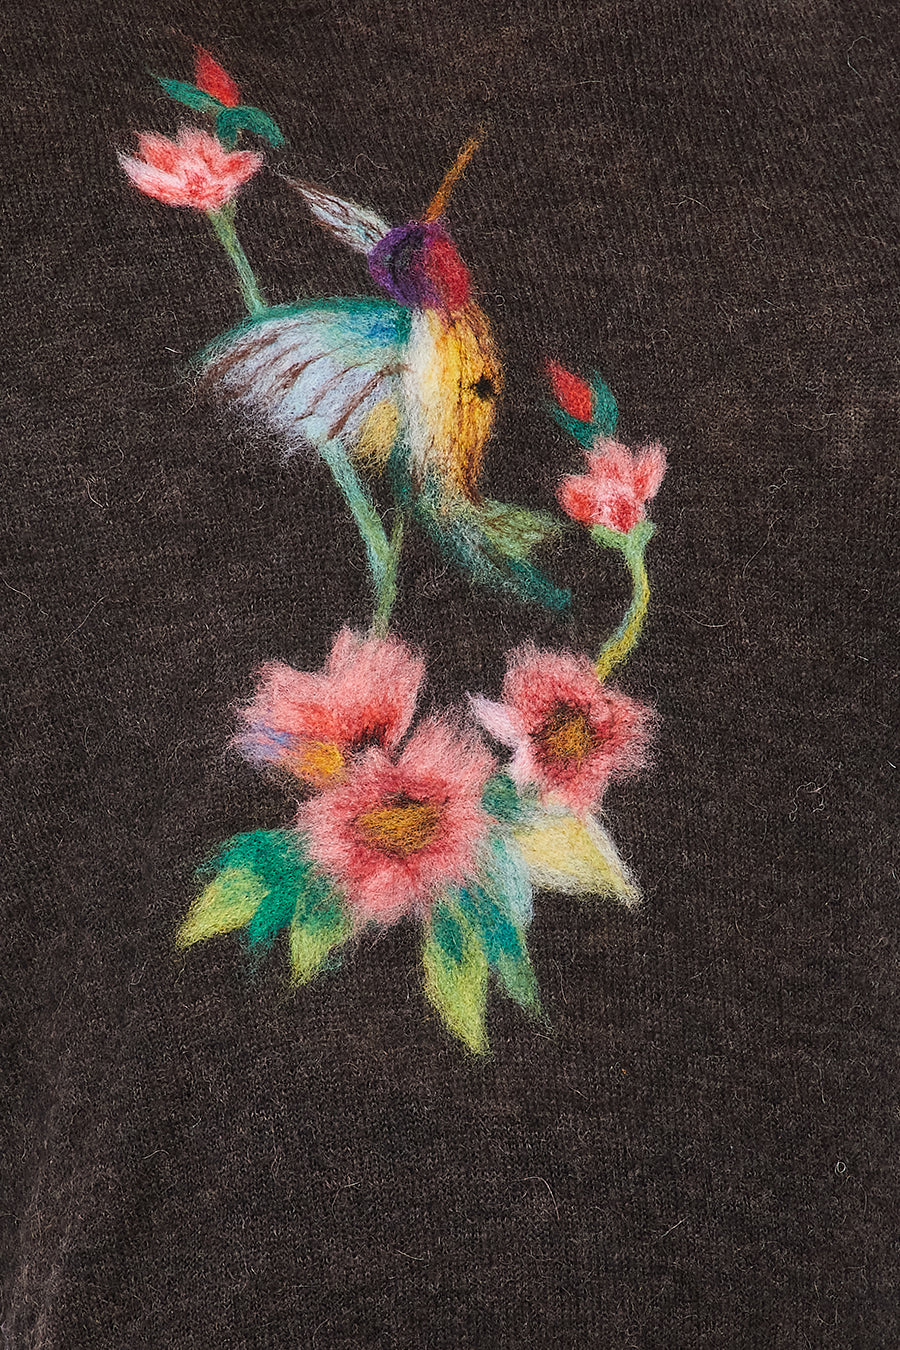 Japanese Bird Pullover - Charcoal